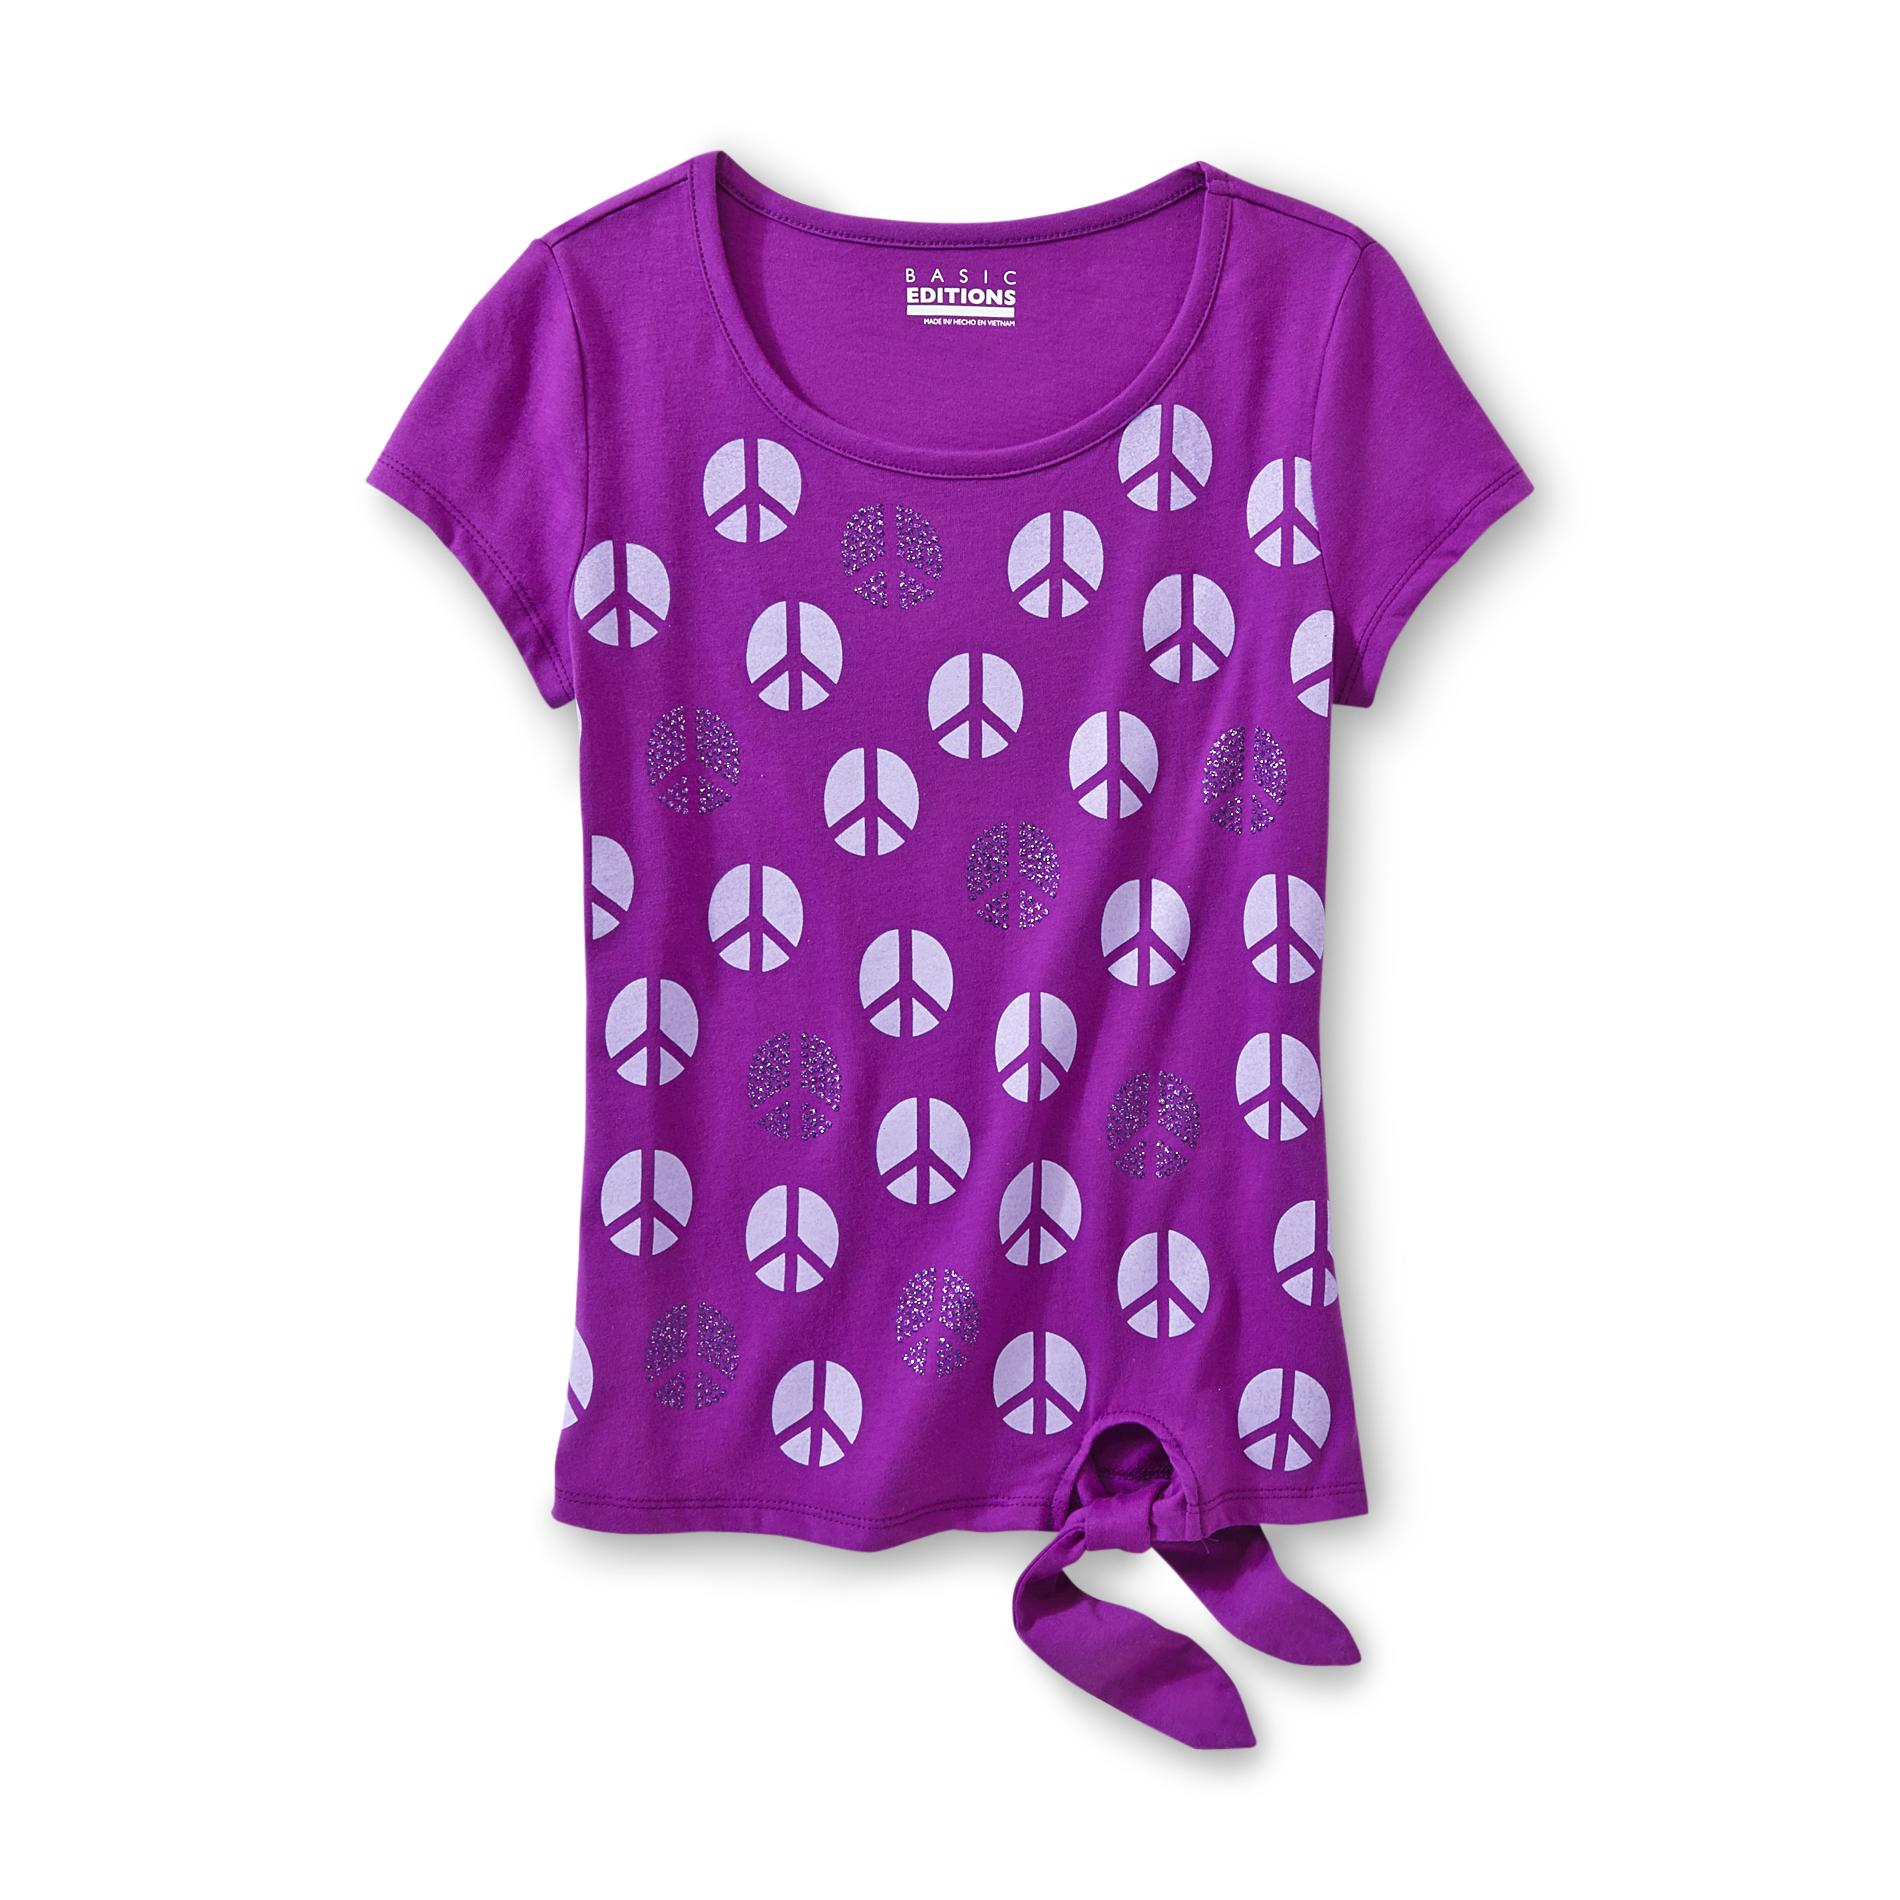 Basic Editions Girl's Spangled Tie-Front T-Shirt - Peace Symbol